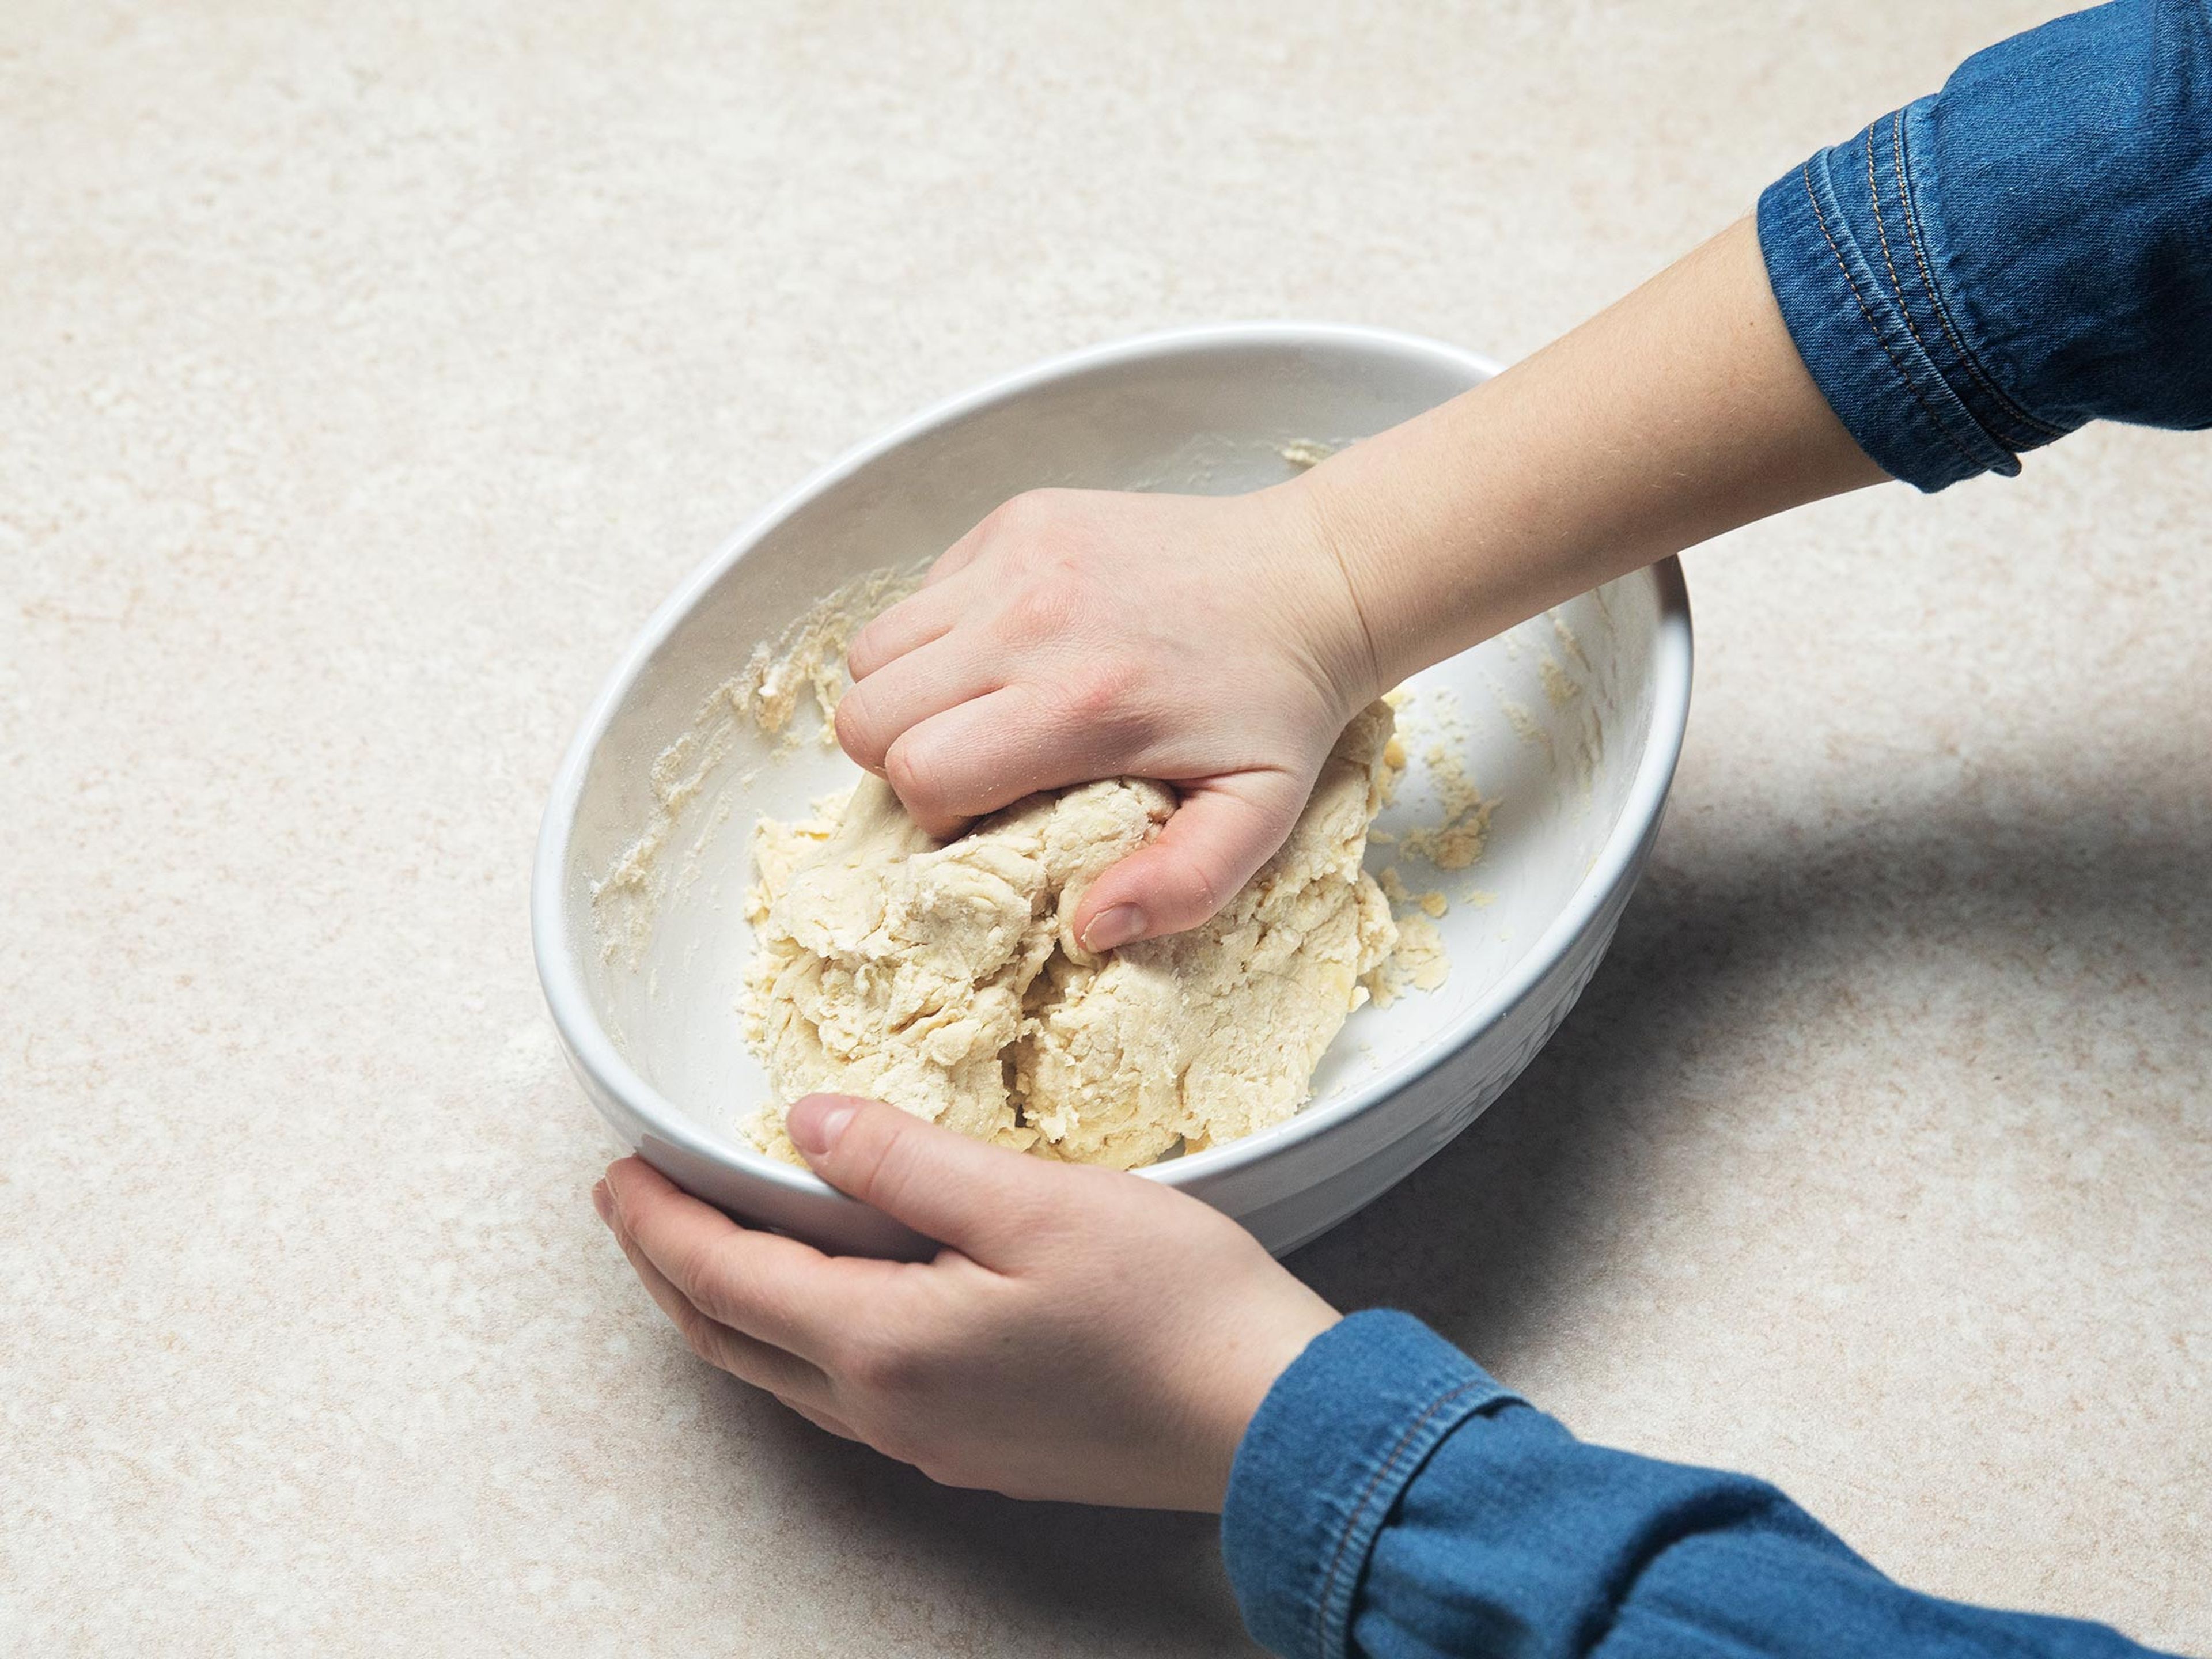 Add flour, salt, and oil to the yeast mixture and knead for approx. 5 - 8 min. with a hand mixer with a dough hook until a smooth dough forms. Cover with a clean kitchen towel and leave in a warm place for 1 hr.